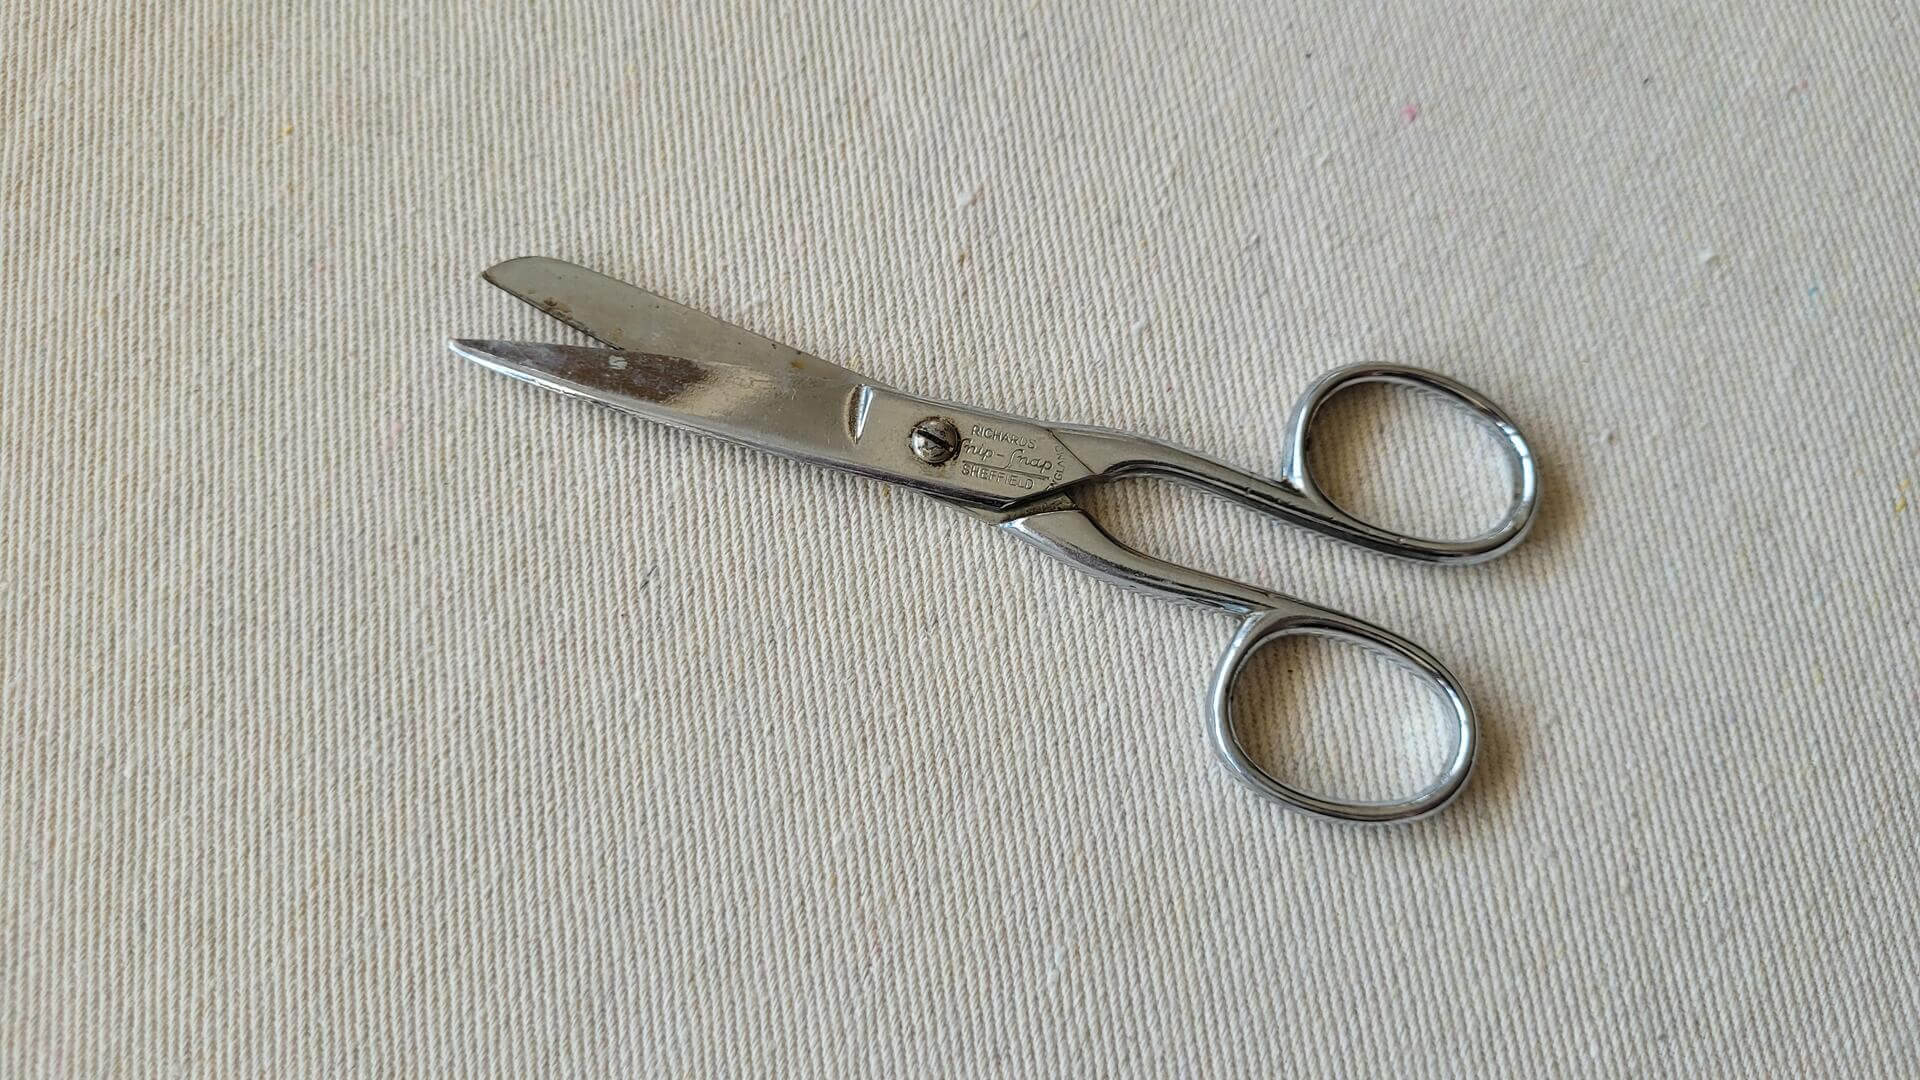 Vintage Richards chrome plated Snip Snap steel scissors 5" long. MCM made in Sheffield England quality upholstery and dressmaker's shears and cutting tools